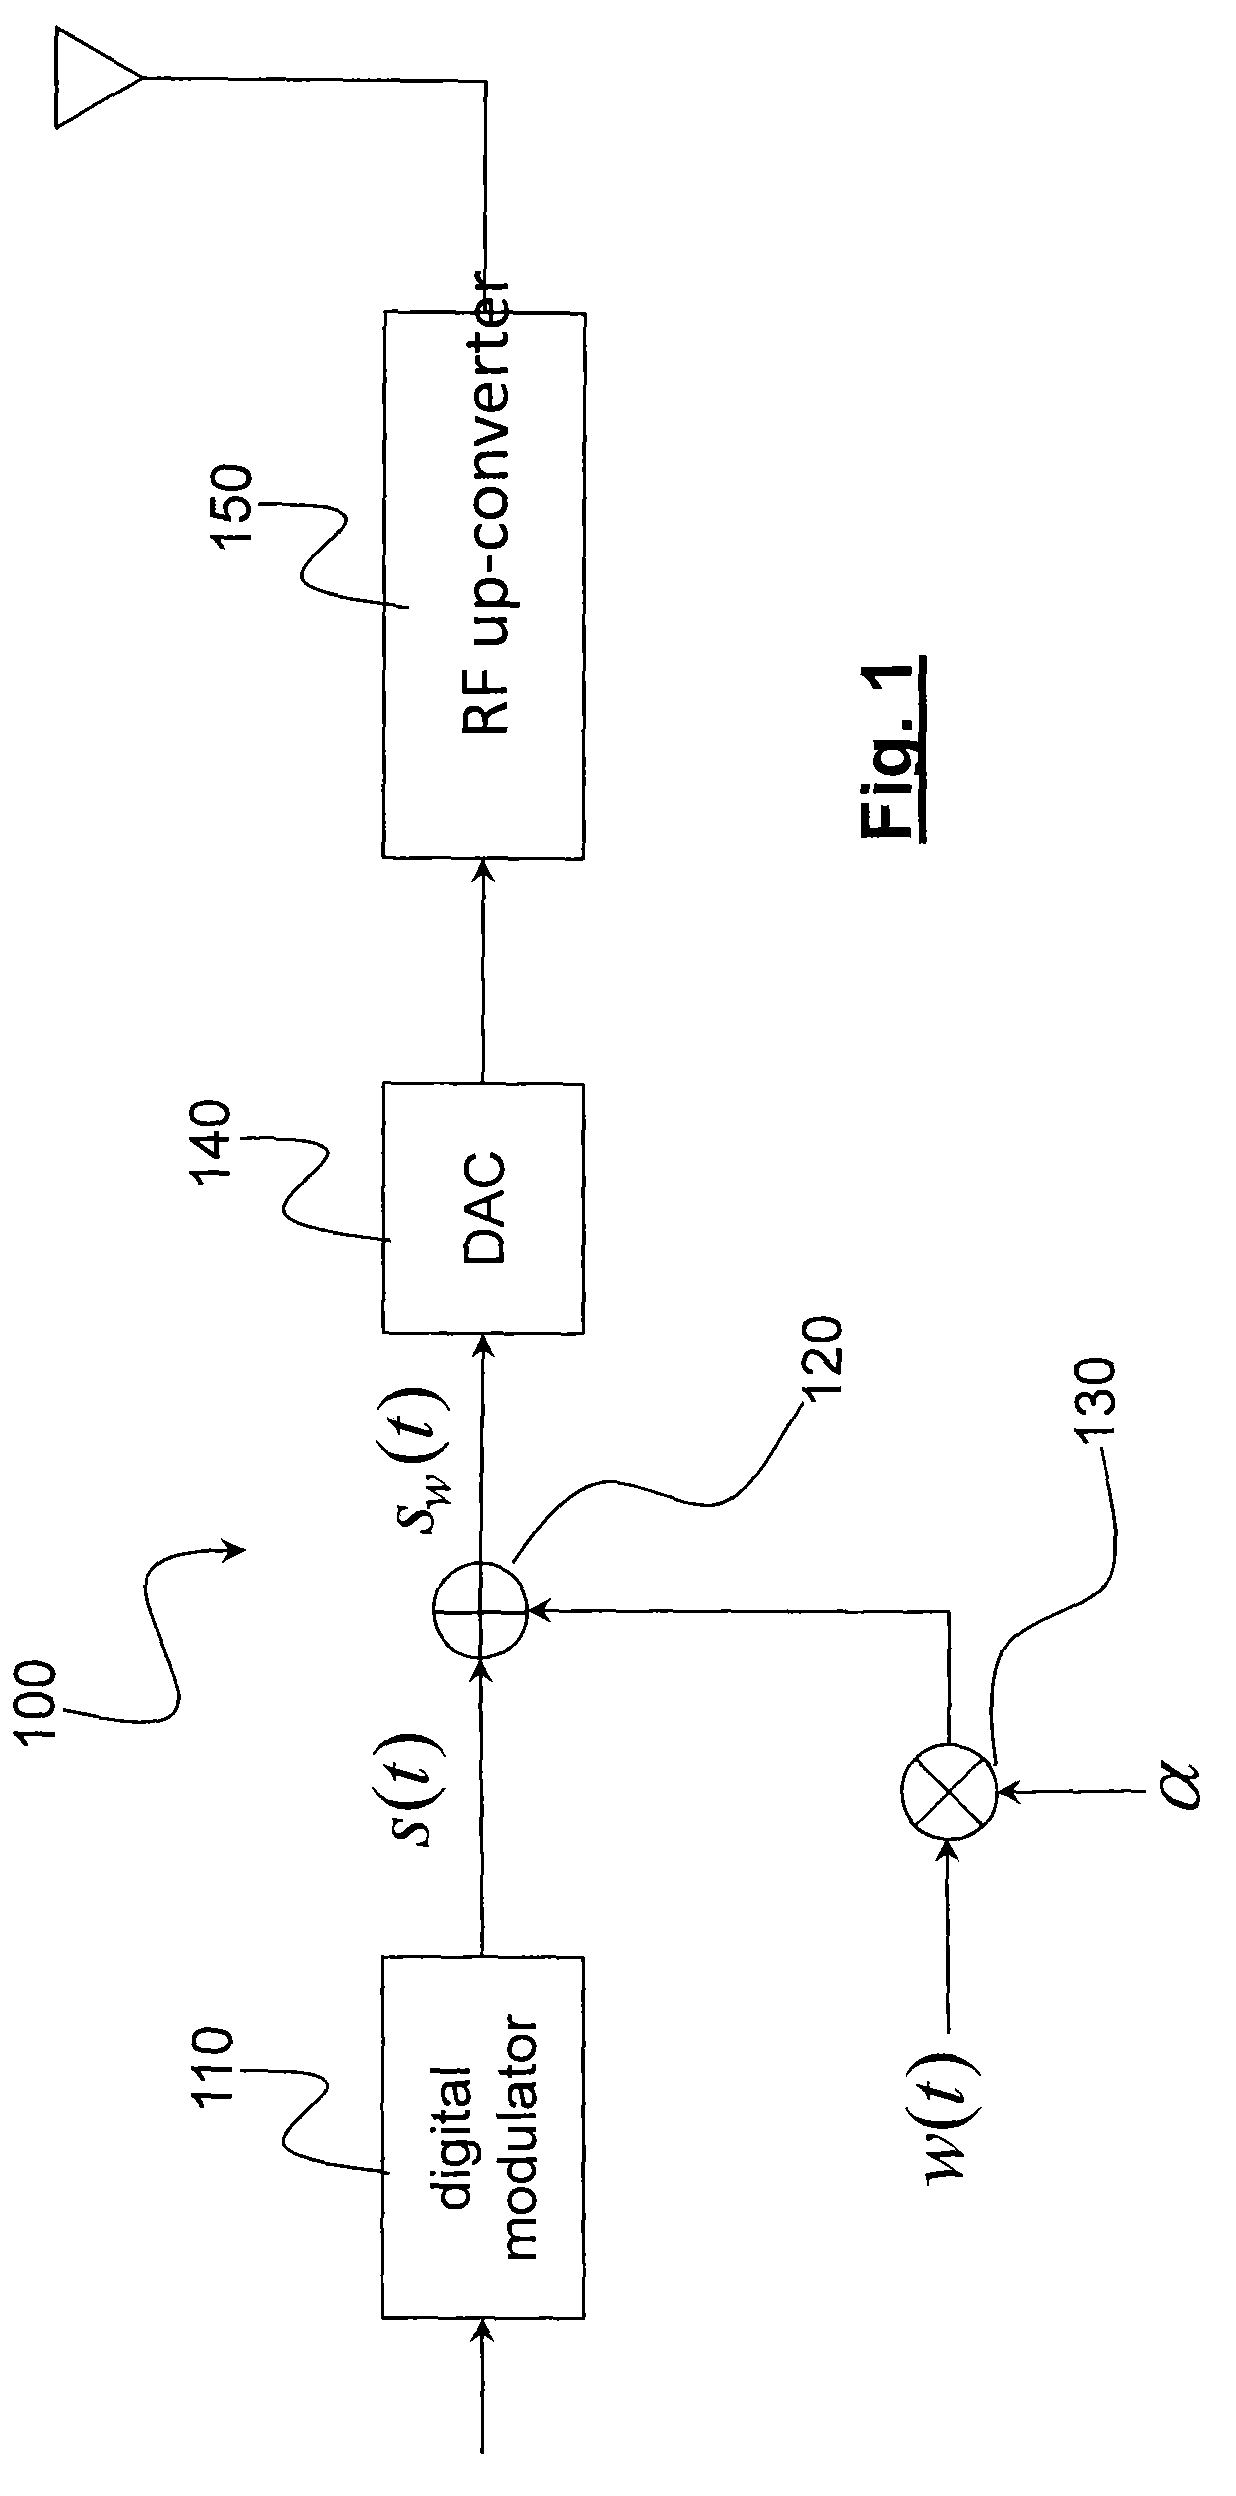 Method for identifying and detecting a radio signal for a cognitive communication system